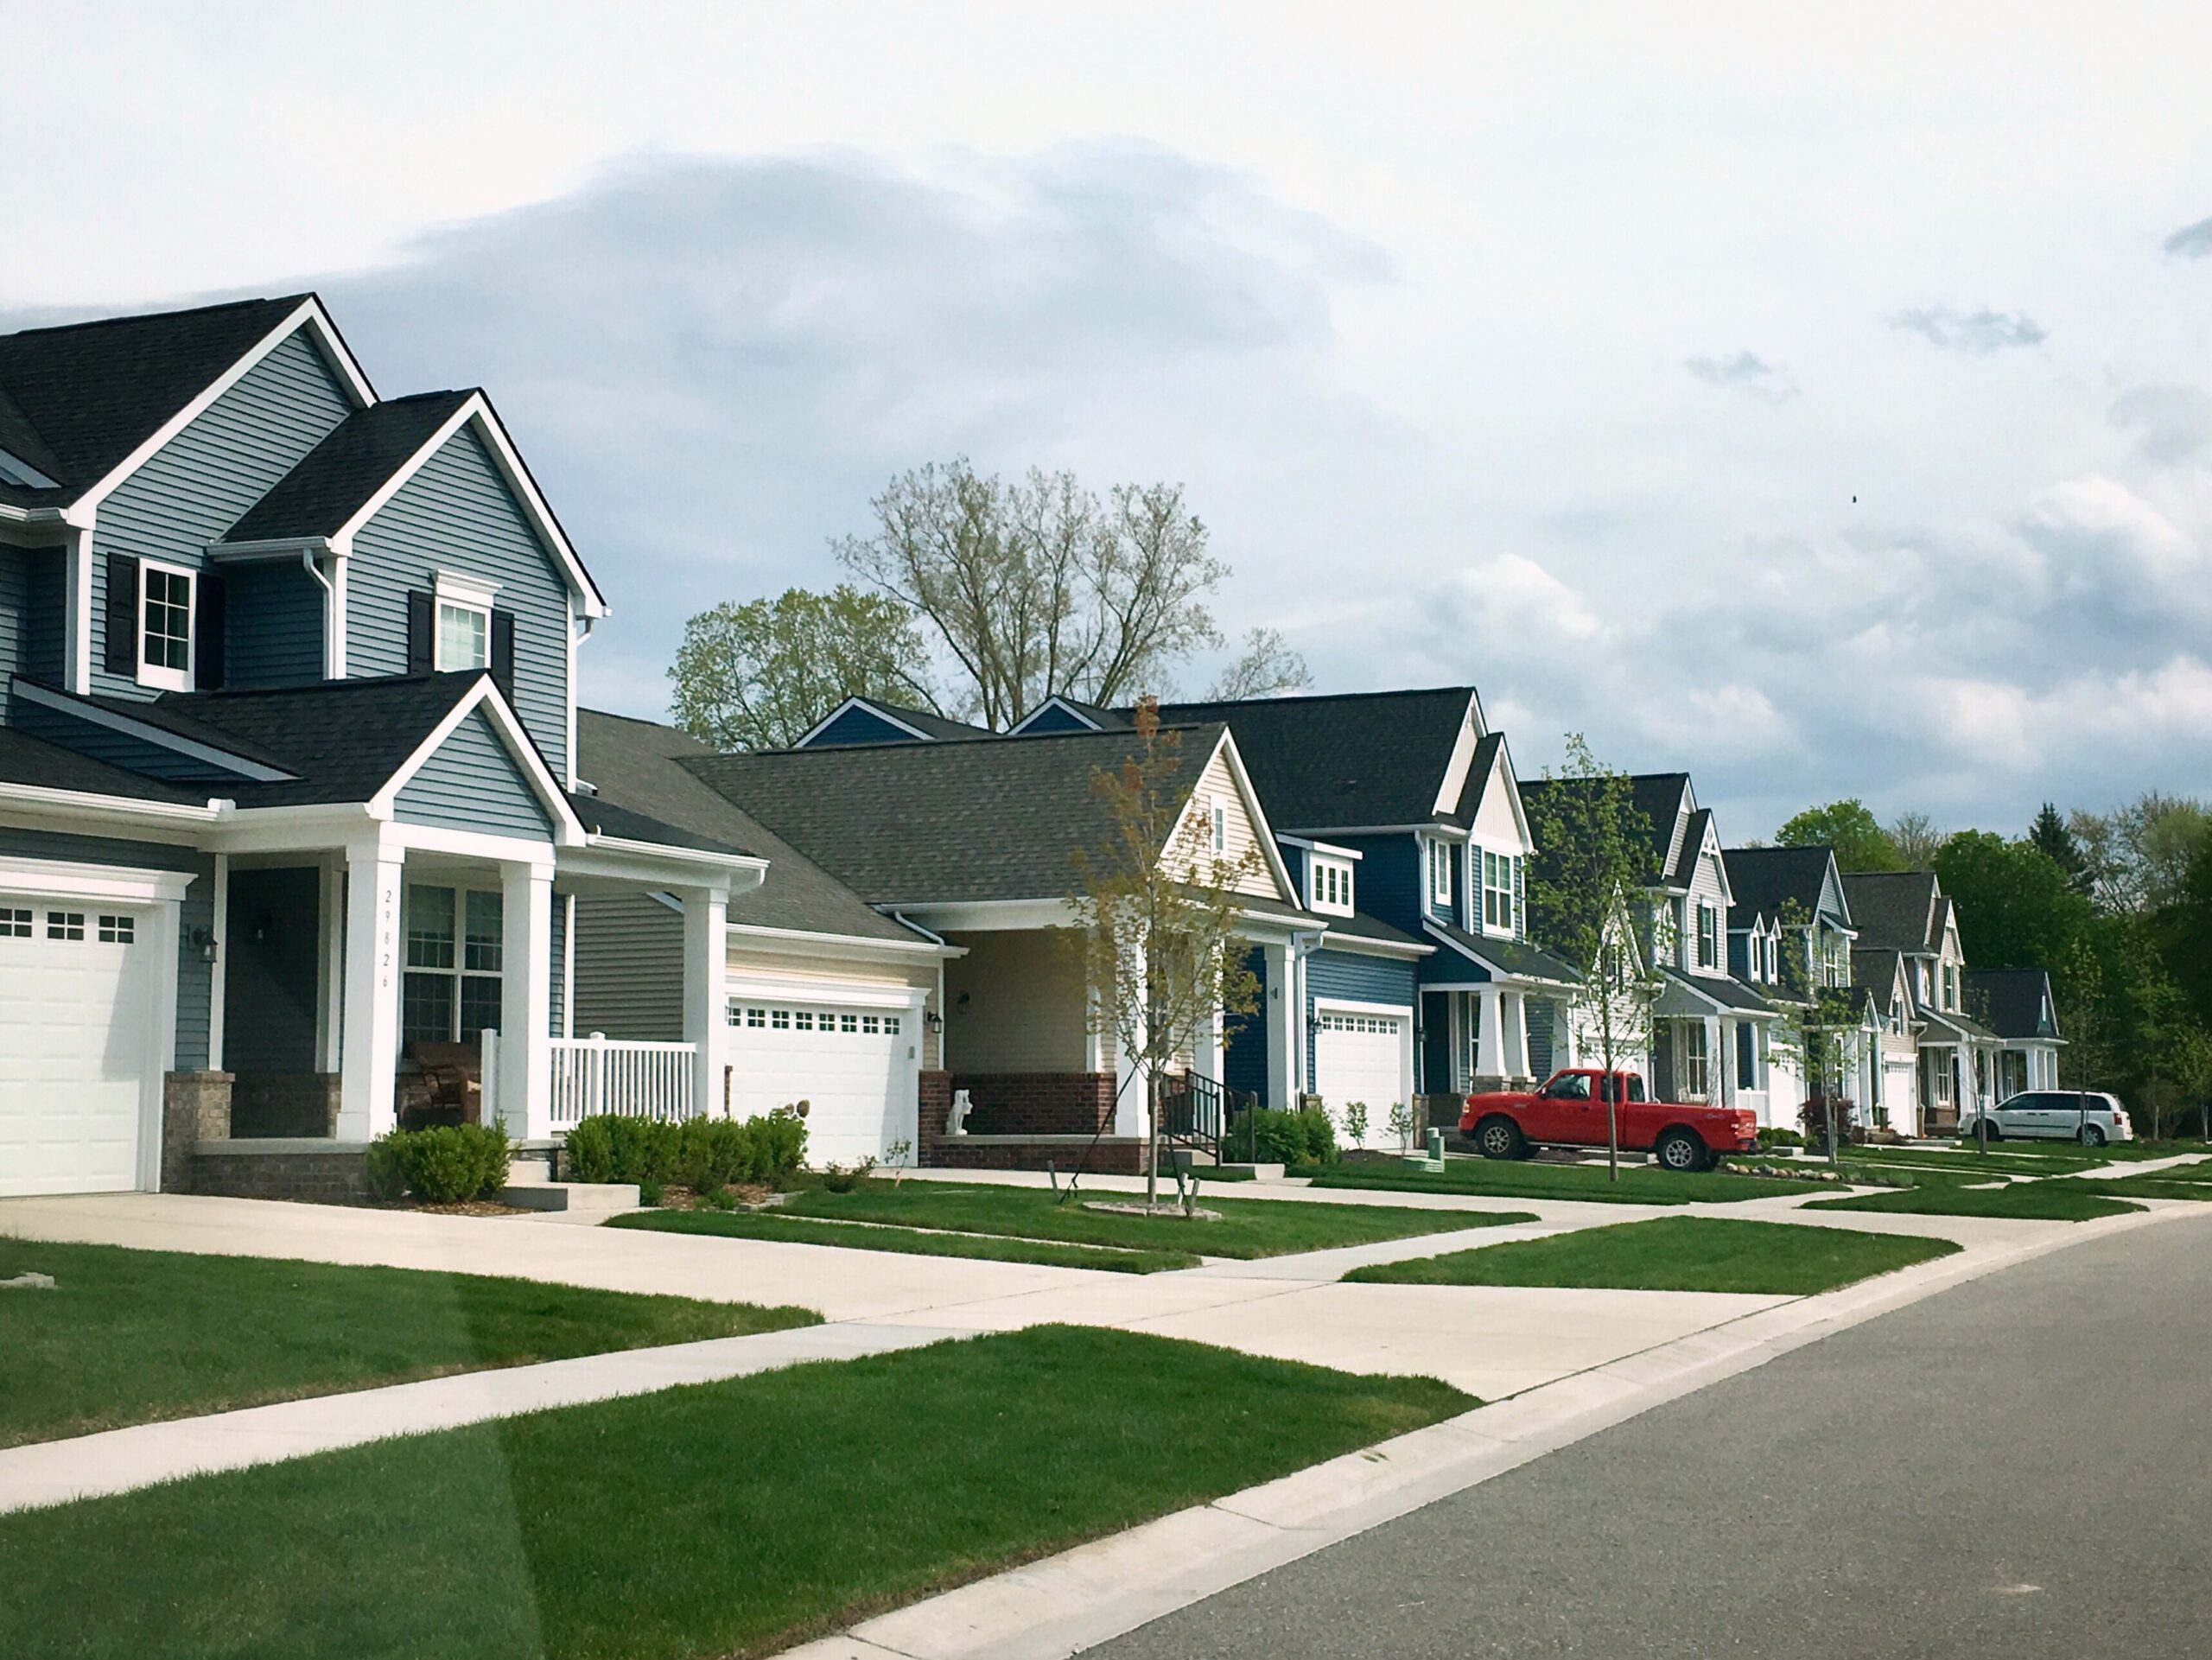 5 Signs of a Great Neighborhood < GoPrime